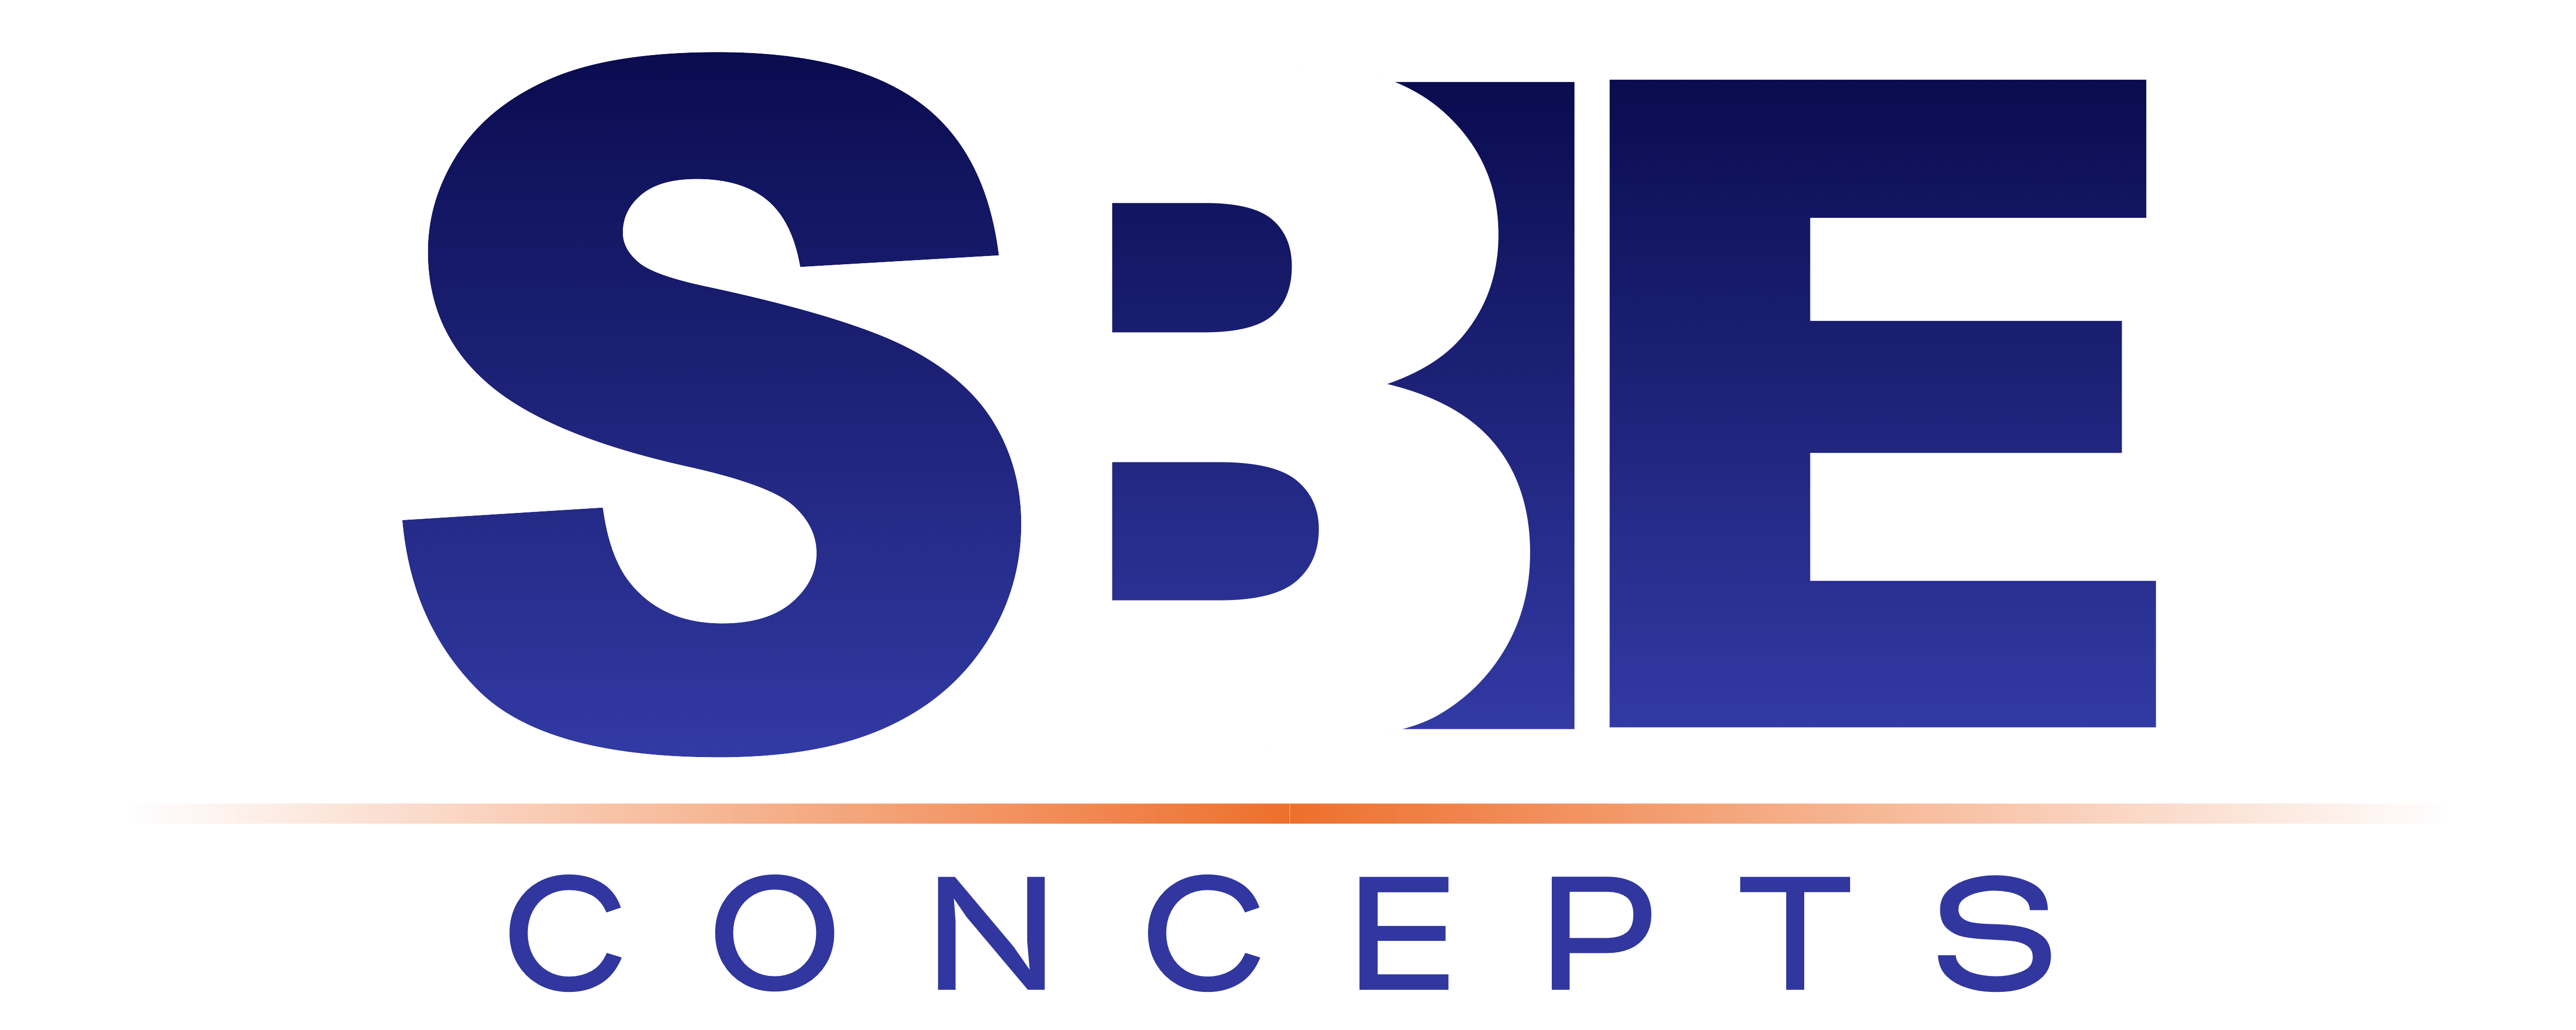 SBE Concepts